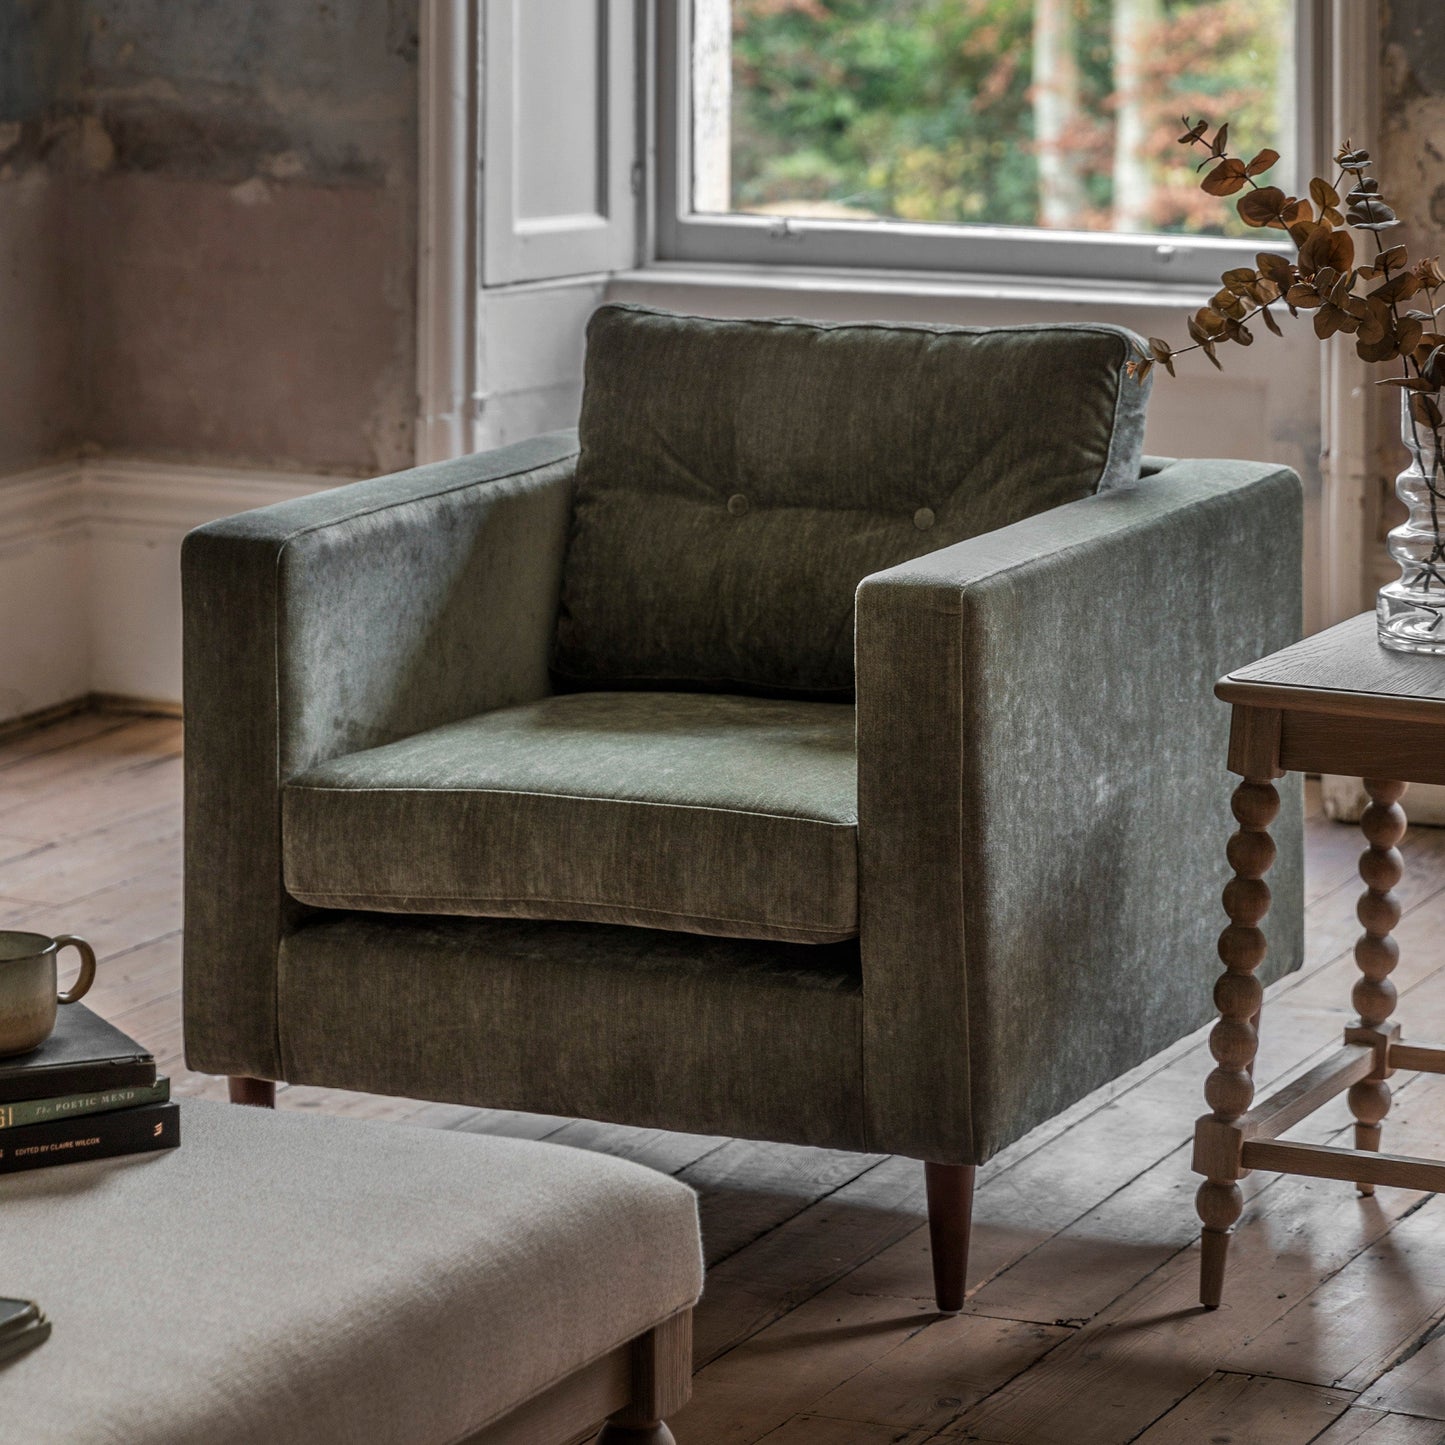 Whitwell Armchair - Colour Options